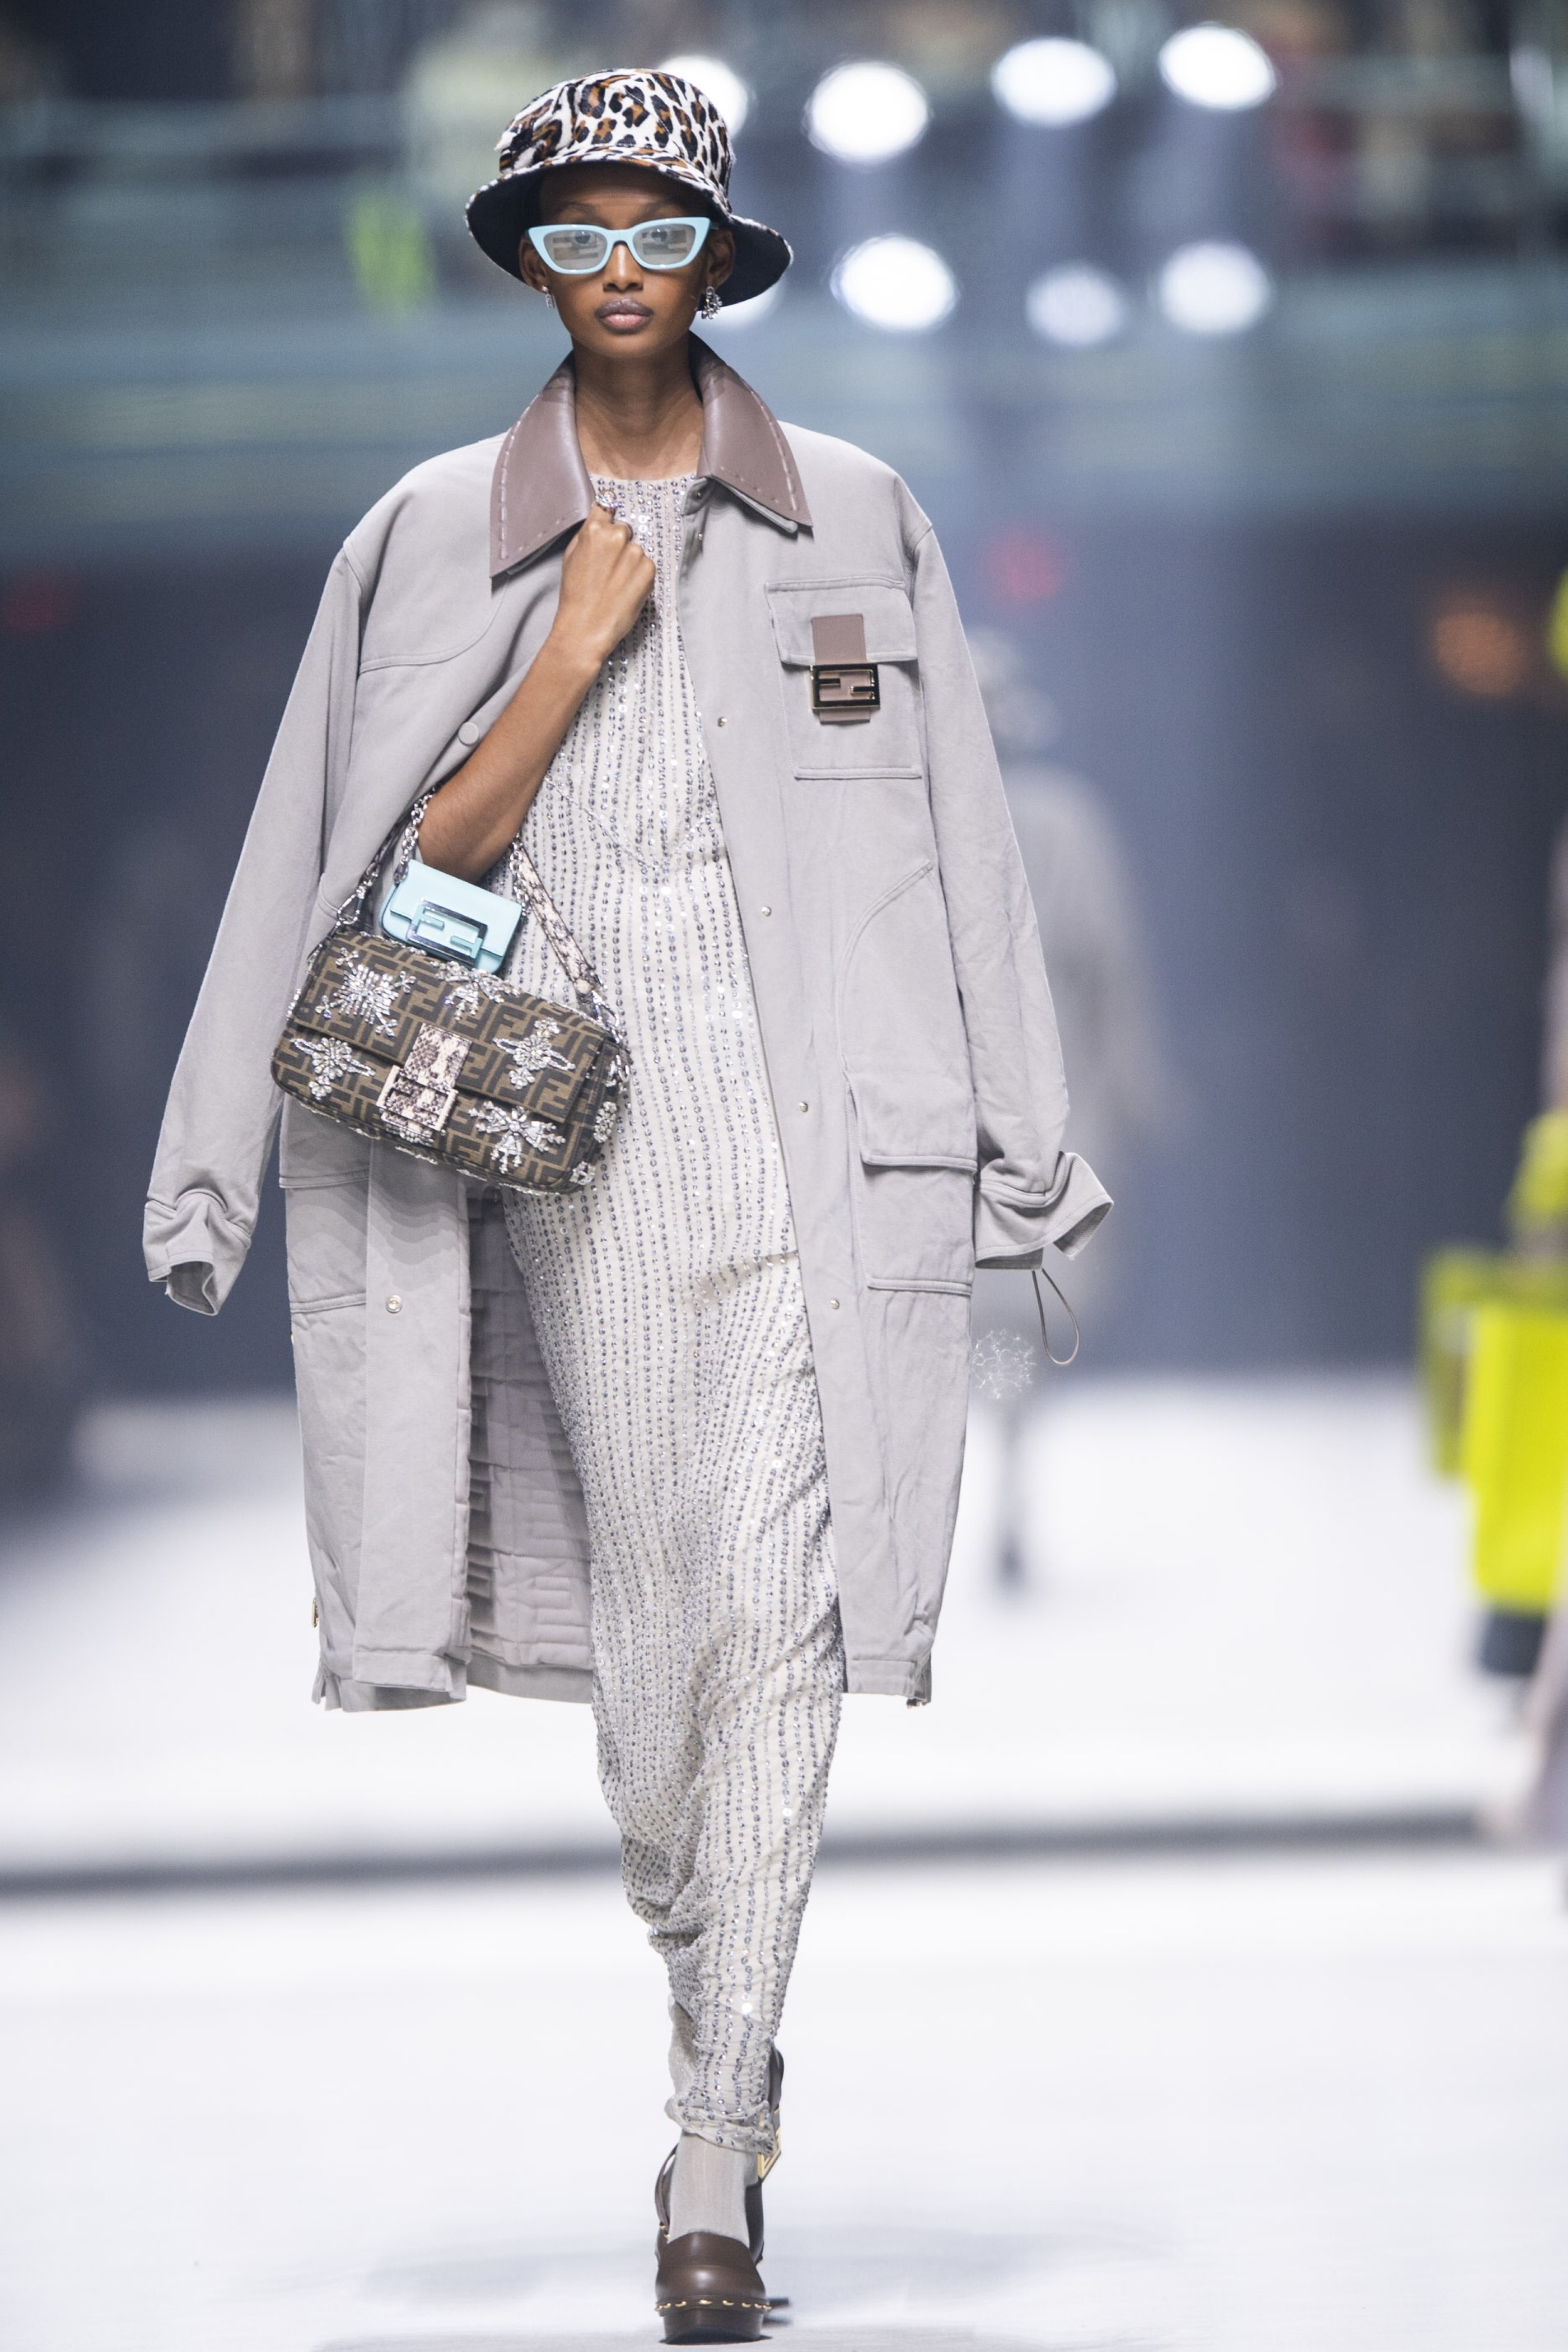 A model walks the runway for Fendi during New York Fashion Week at The Hammerstein Ballroom in New York, U.S., Sept. 9, 2022. (AP Photo)